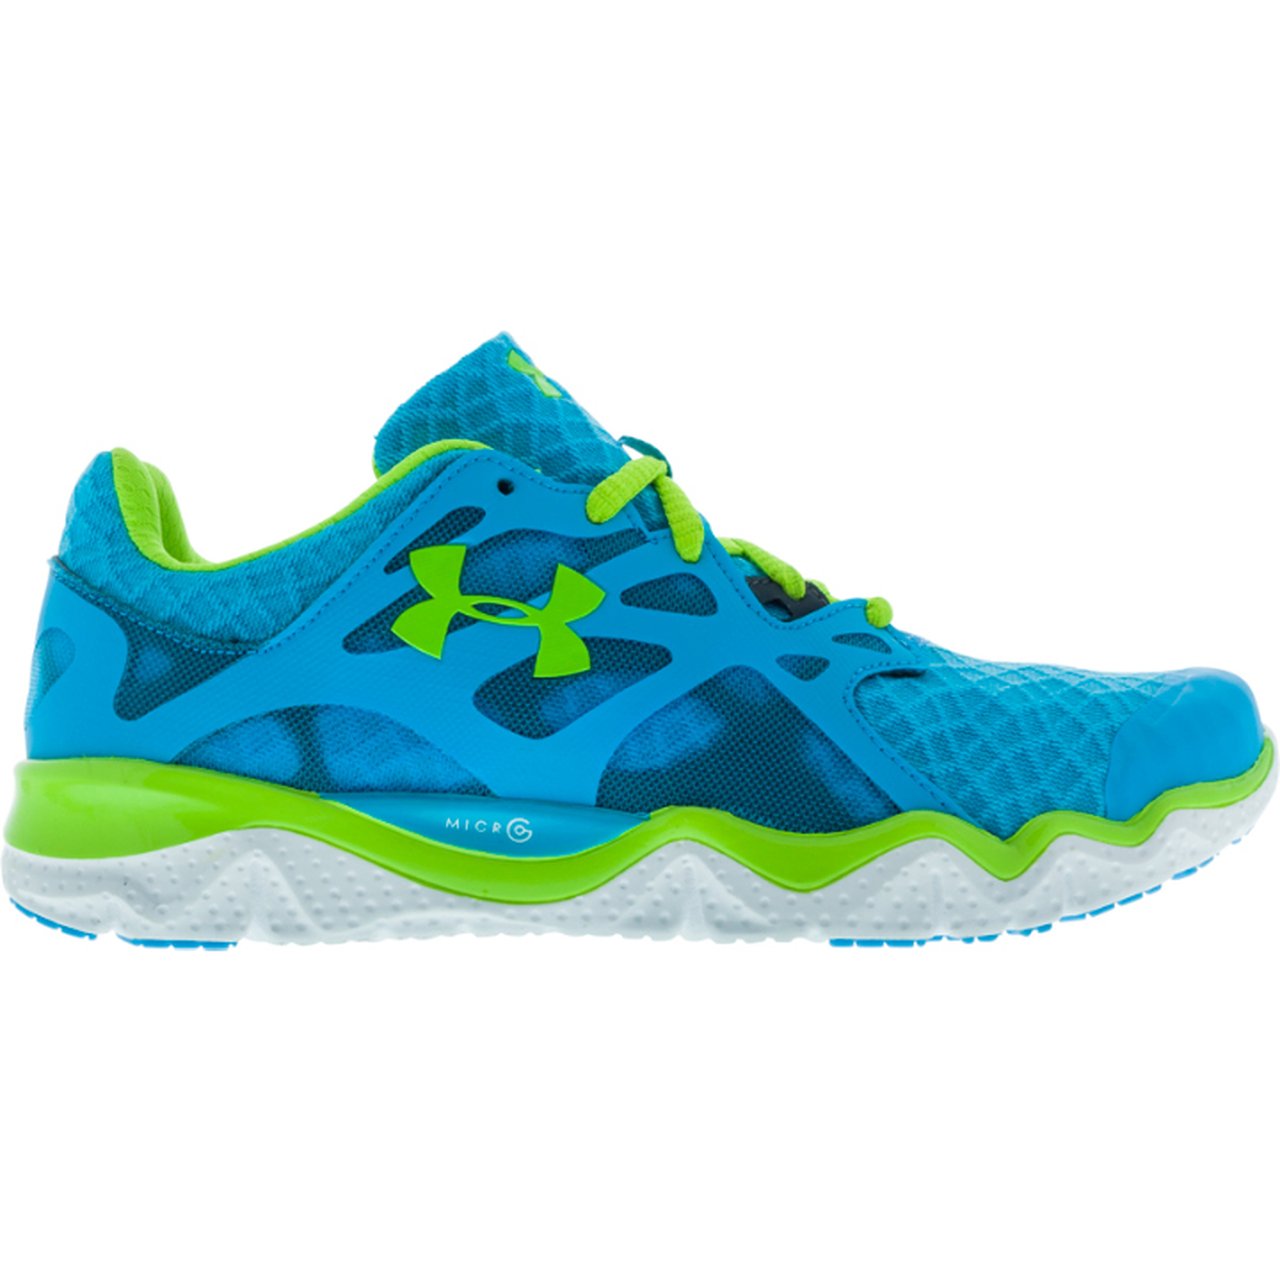 Under Armour Micro G Monza Running Shoes in Pirate Blue/Hyper Green/White —  UFO No More